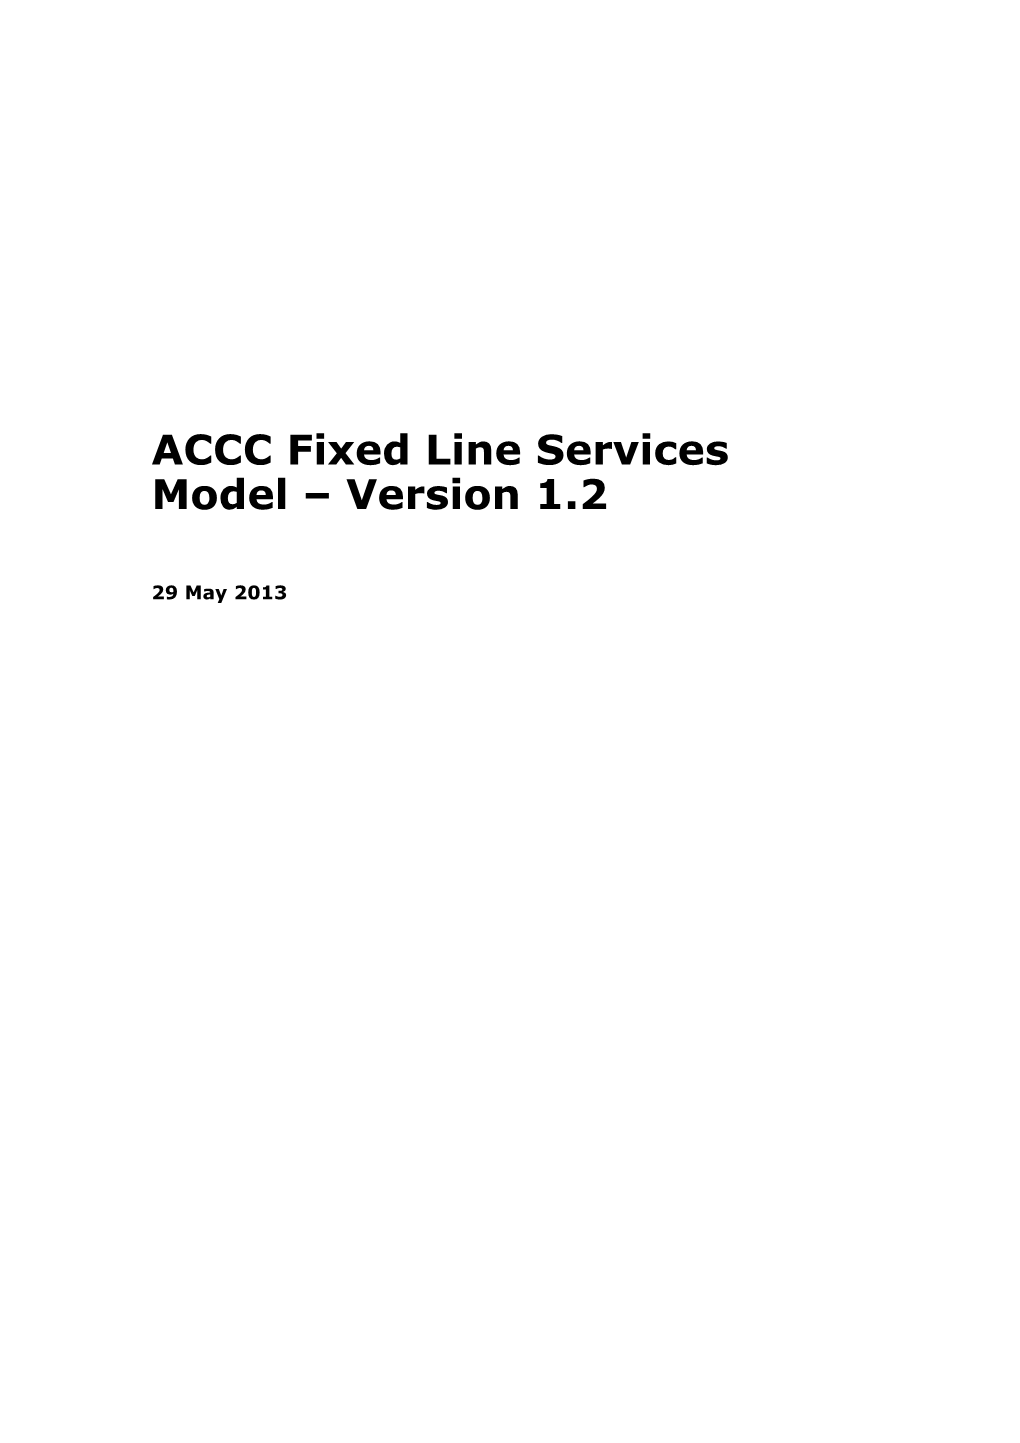 ACCC Fixed Line Services Model Version 1.2